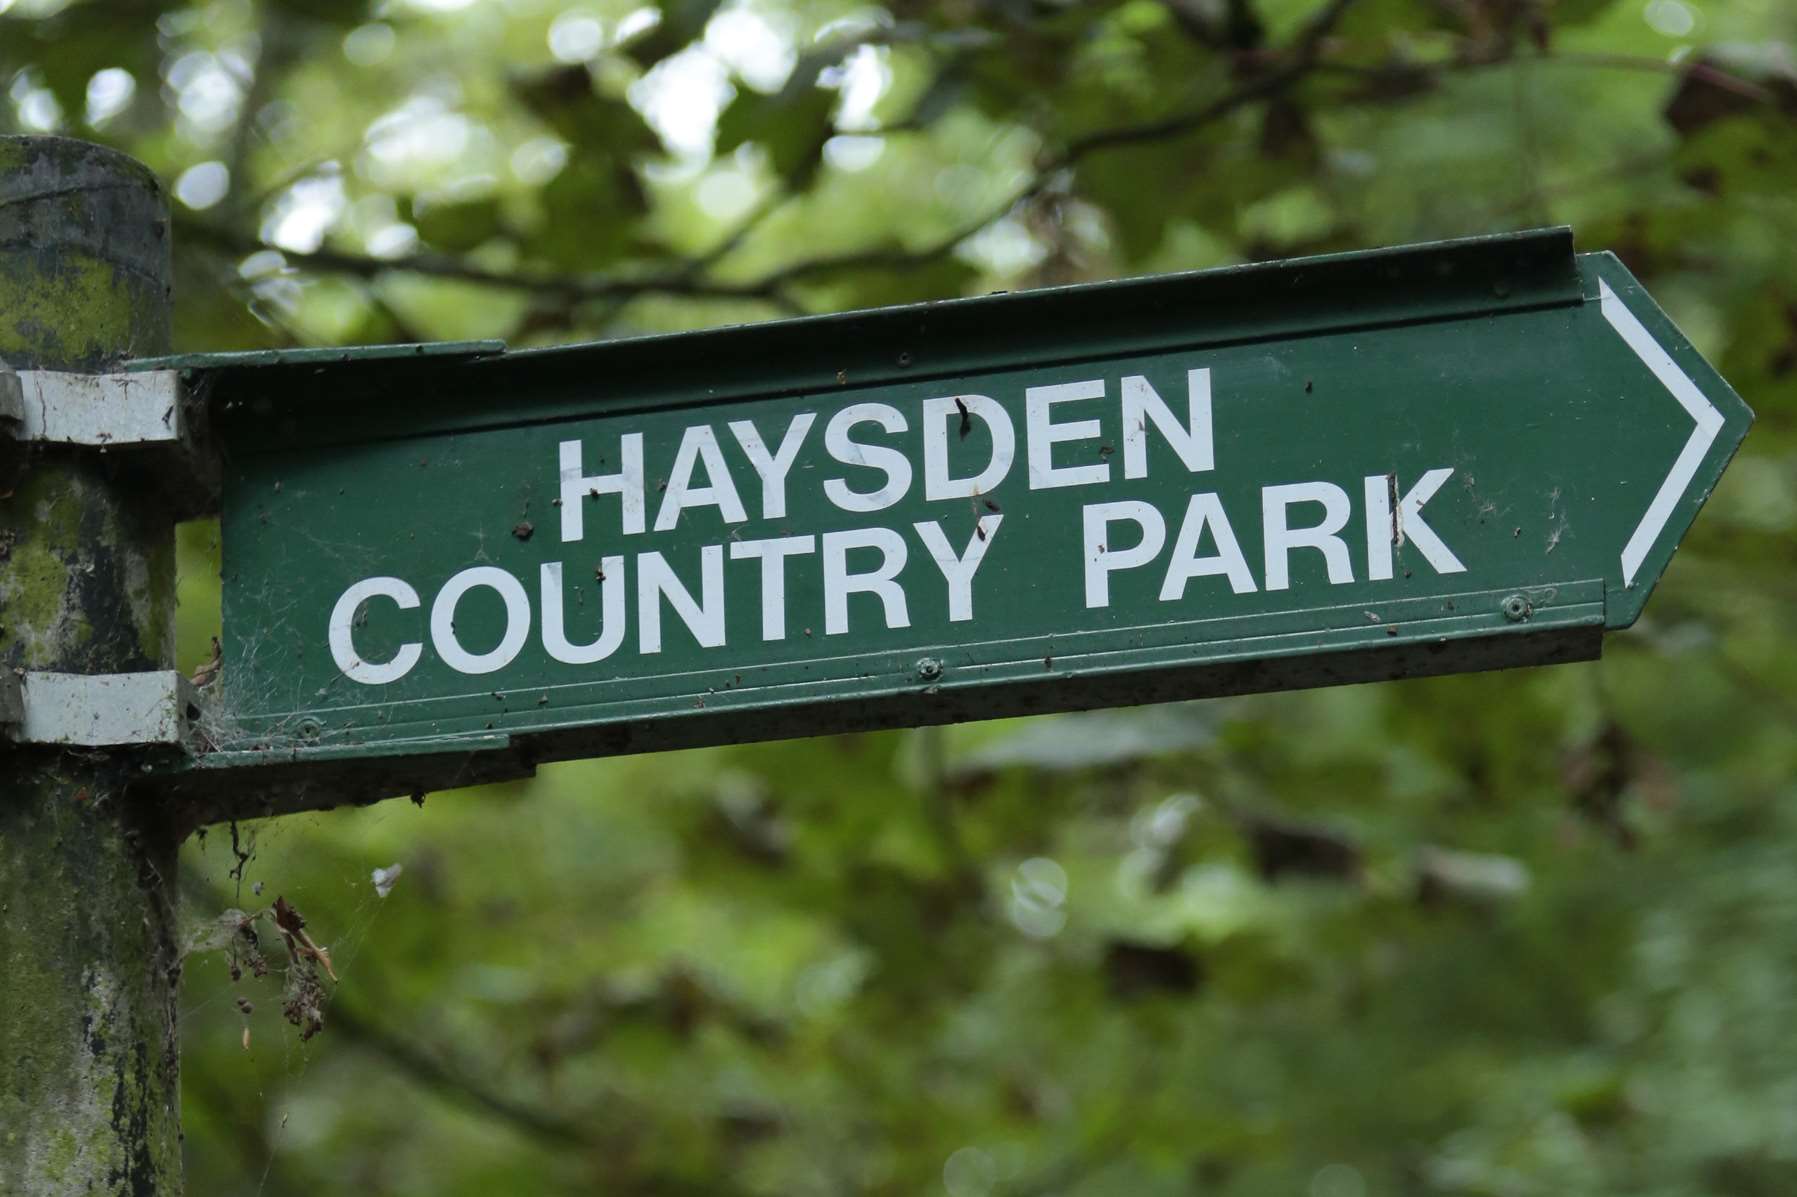 A body was pulled from the River Medway near Haysden Country Park